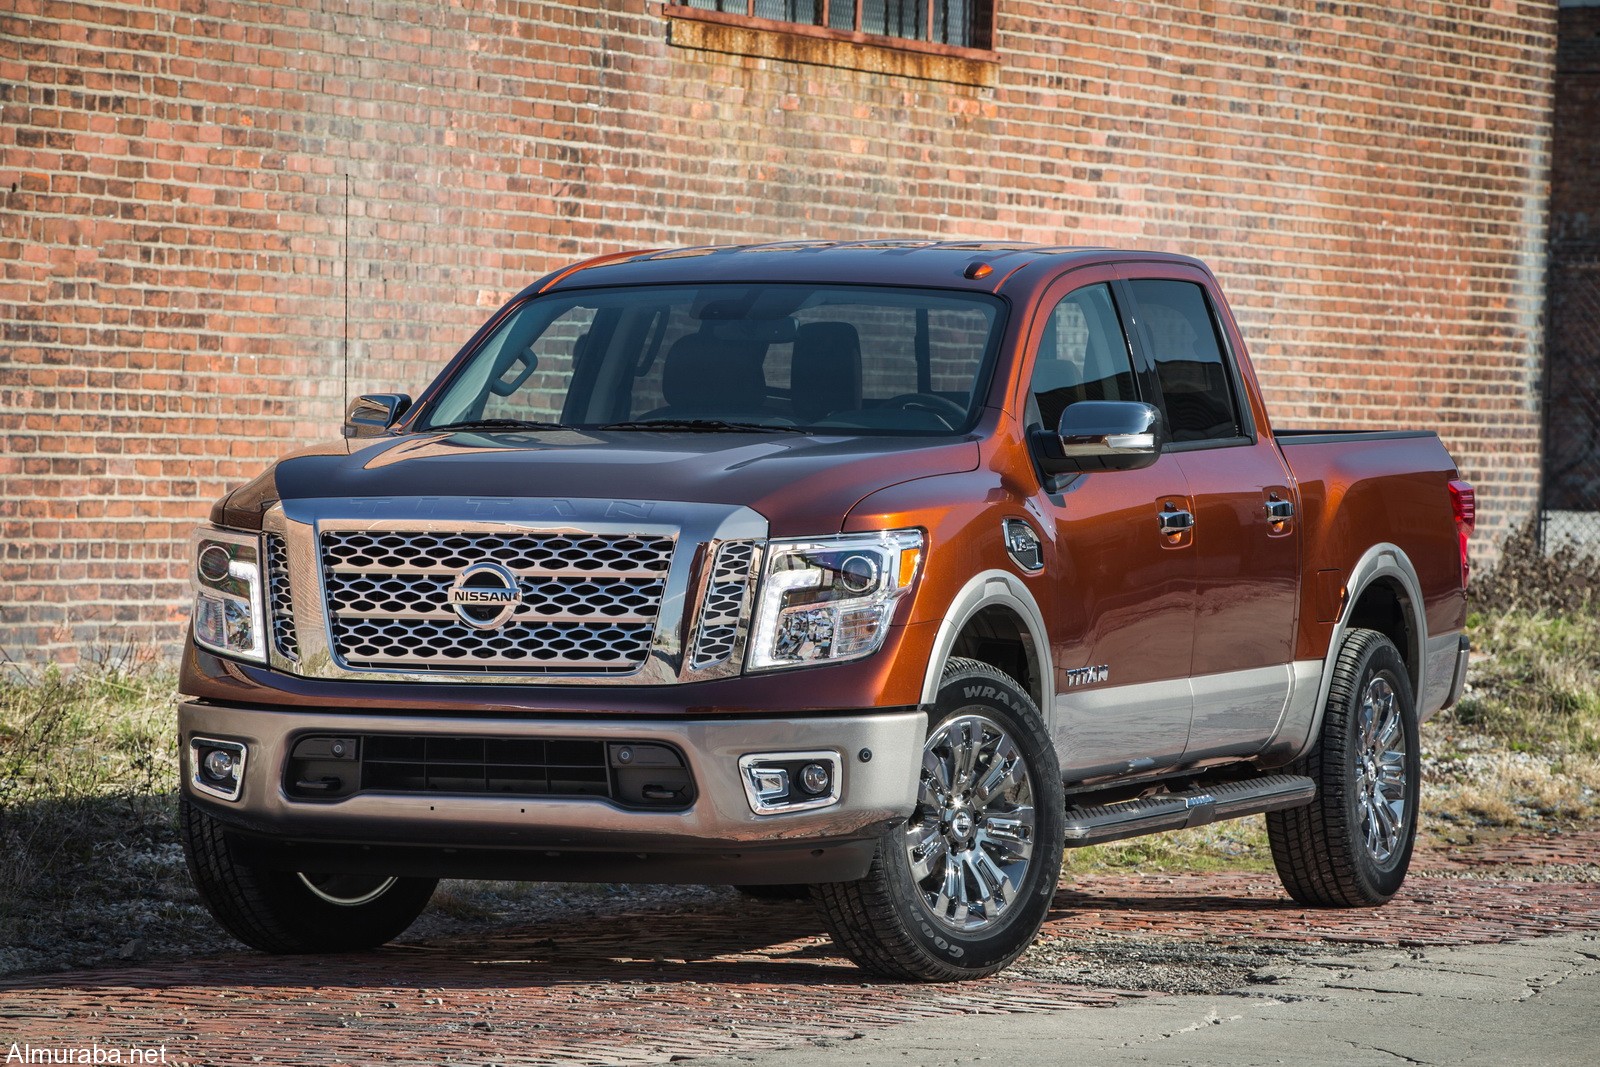 The 2016 TITAN XD is equipped with a 5.6-liter Endurance® V8 gasoline engine. Assembled in Decherd, Tenn., the new 5.6-liter Endurance V8 engine features four-valves per cylinder, Variable Valve Event & Lift and Direct Injection, and is rated at 390 horsepower @ 5,800 rpm and 401 lb-ft of torque @ 4,000 rpm.